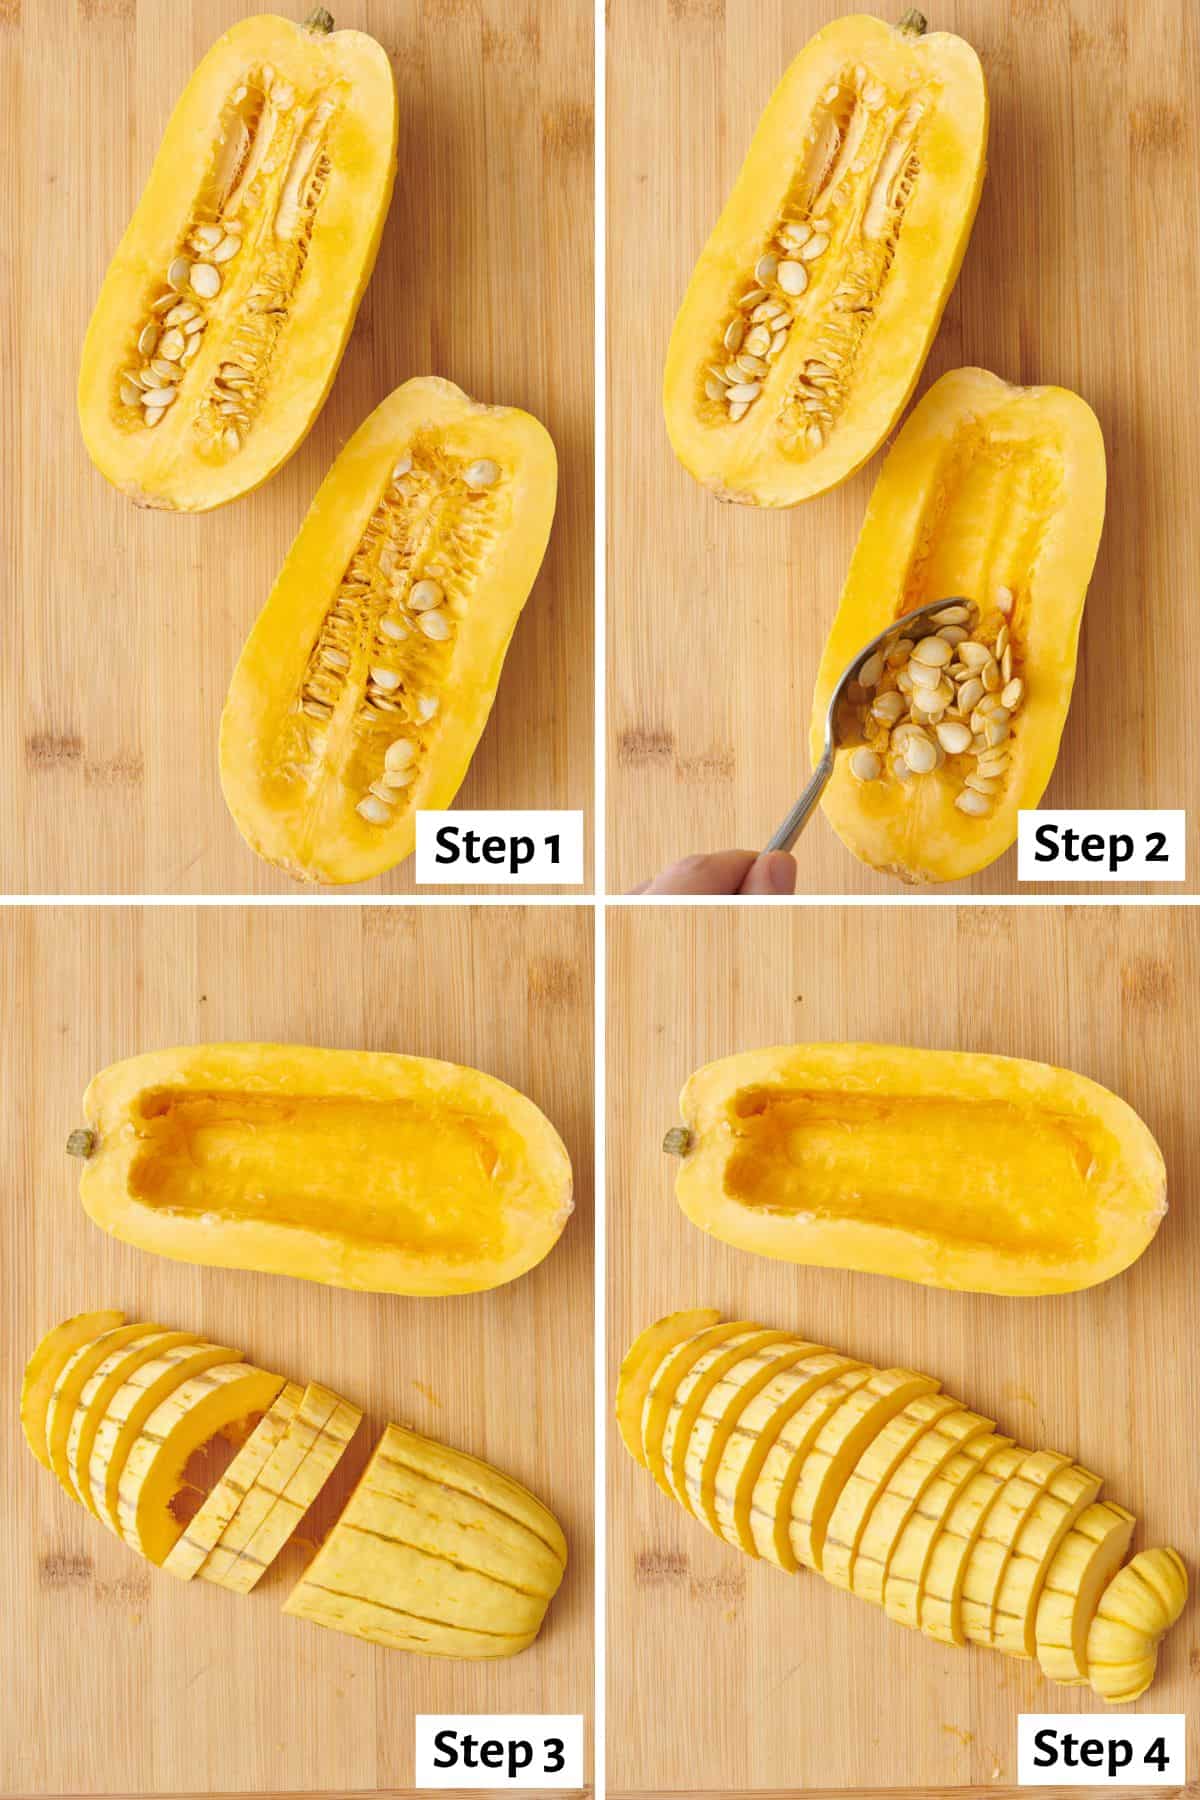 4 image collage preparing vegetable for roasting: step 1- delicata squash cut in half, flesh side up to show seeds, step 2- spoon scooping seeds out of one half, step 3- one half flipped flesh side down partially cut into slices, step 4- after one half is completely sliced.